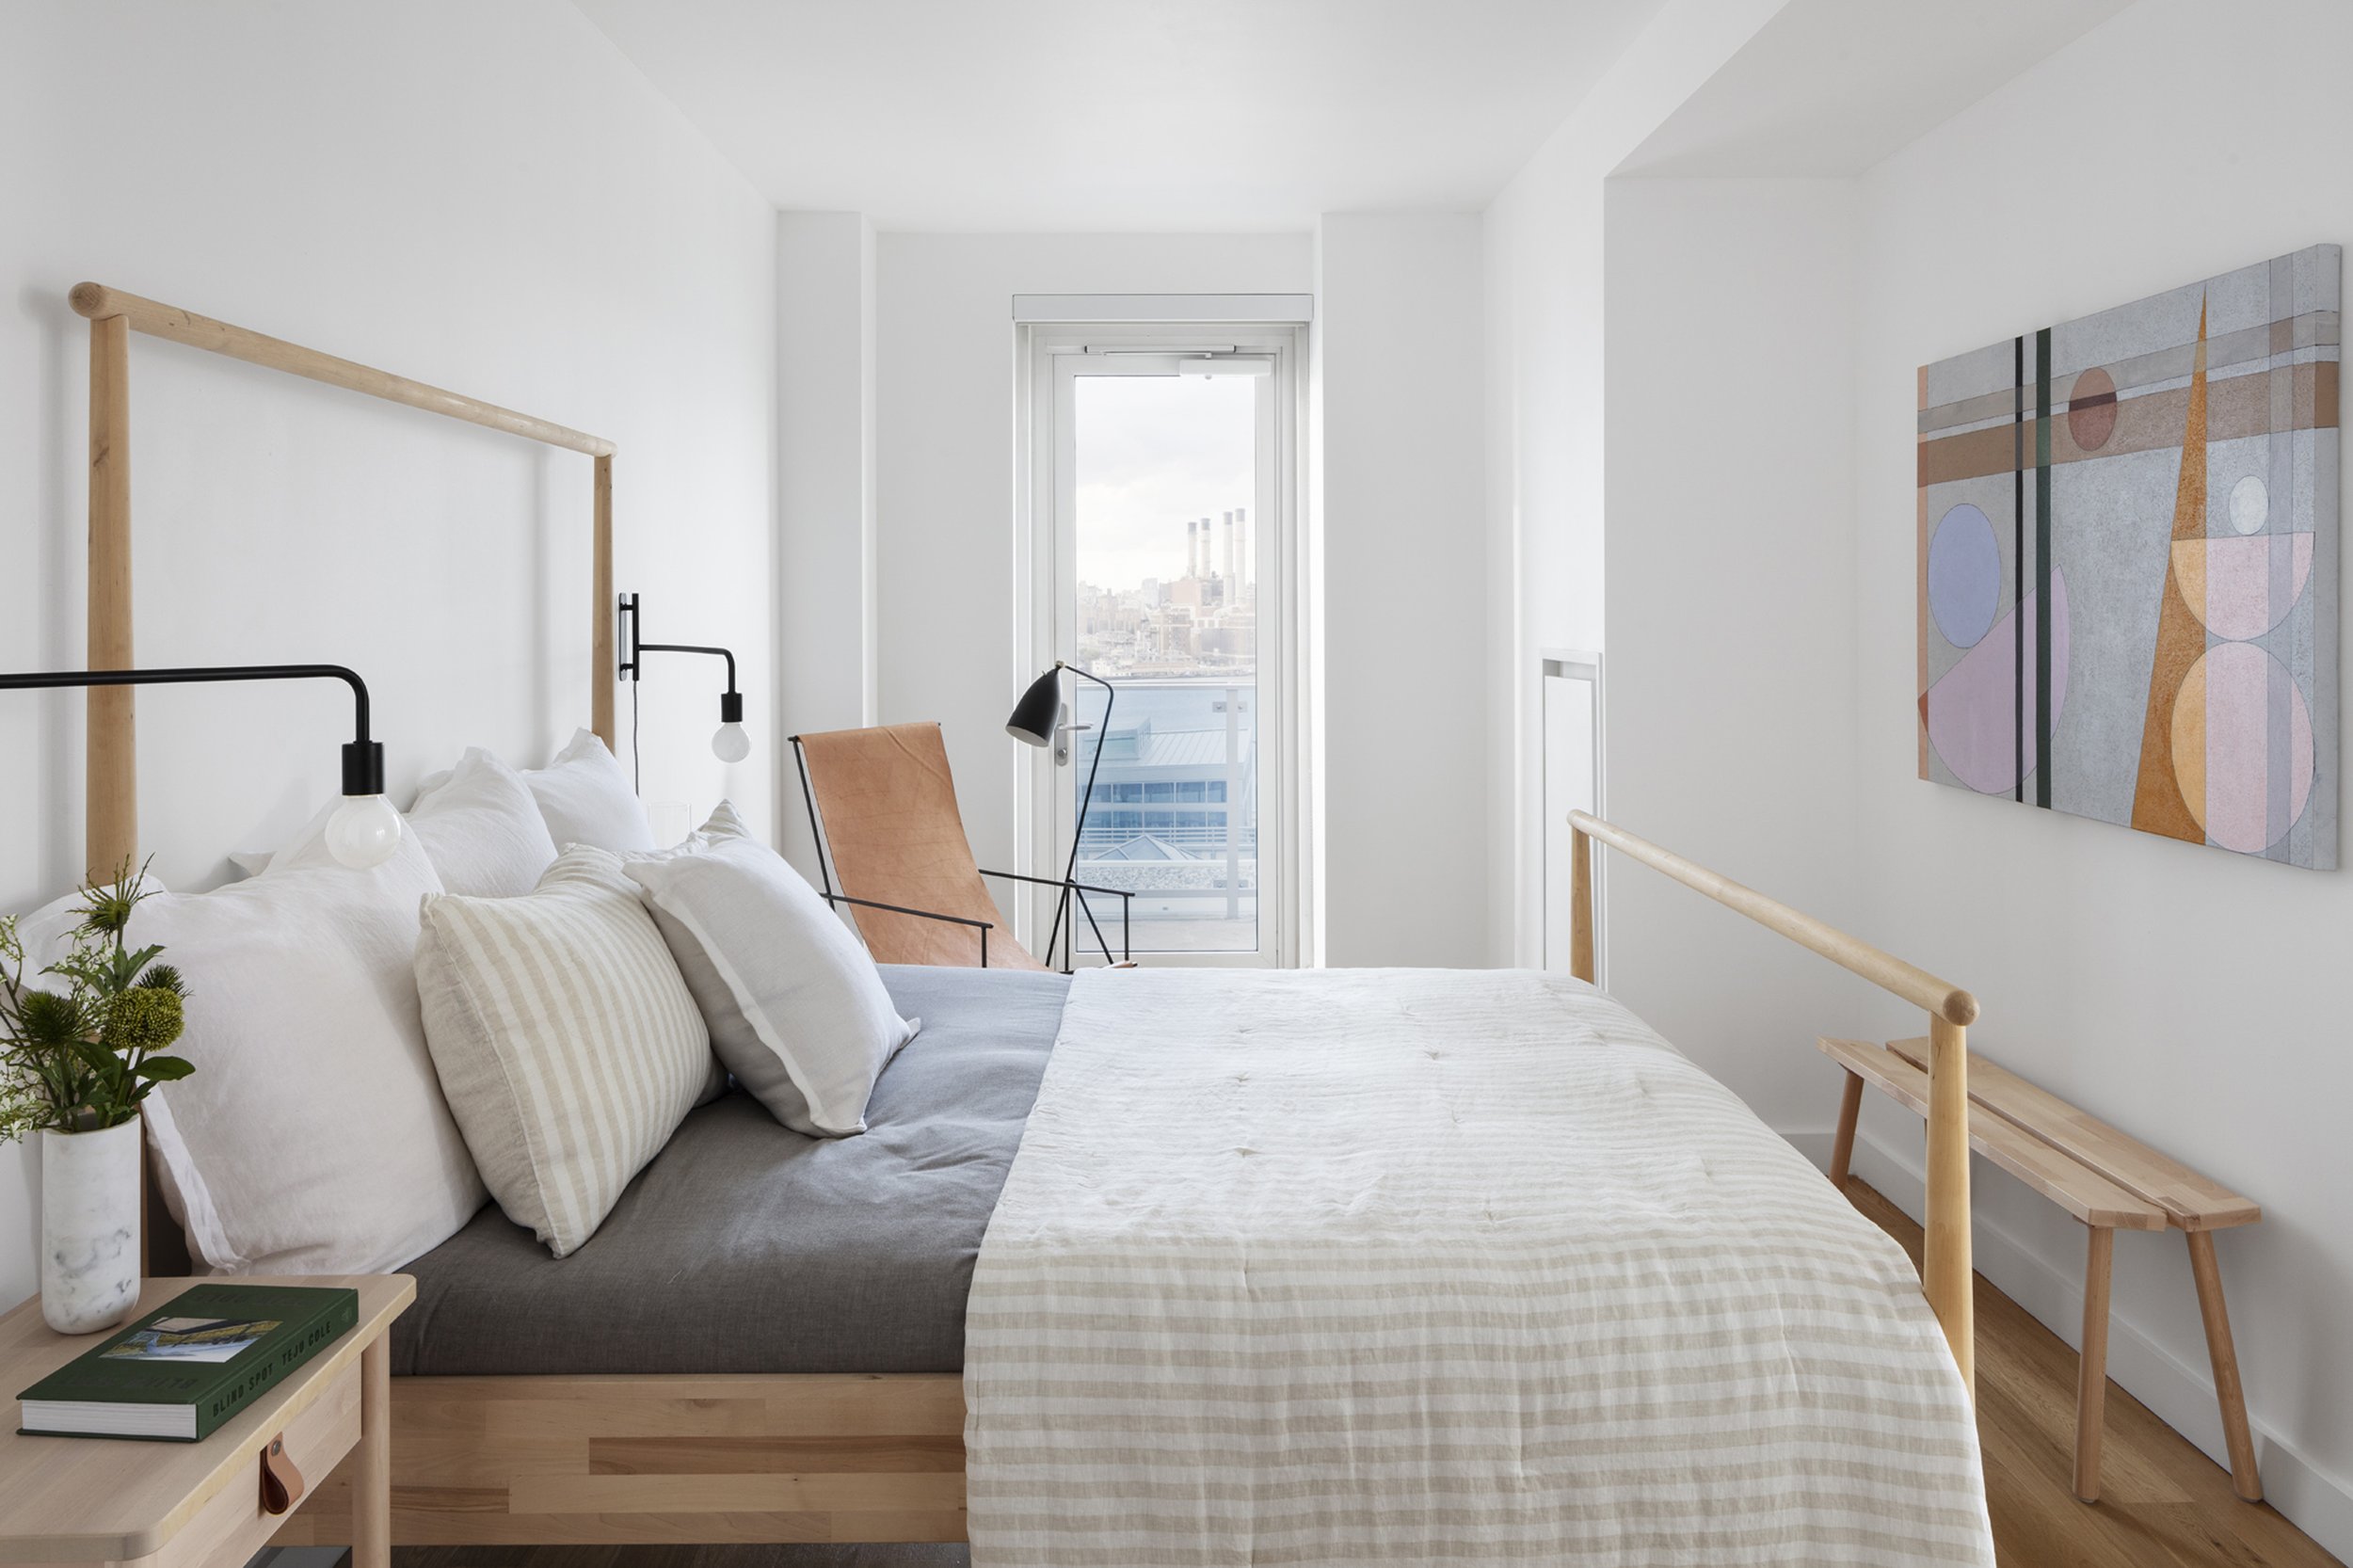  Hovey Design  North 7th Street PH1C   The far side of this bedroom opens to a private balcony looking at Manhattan. Located in the Edge building in Willamsburg this duplex condo sold by Harkov Lewis Team at Halstead was staged by the sisters at Hove